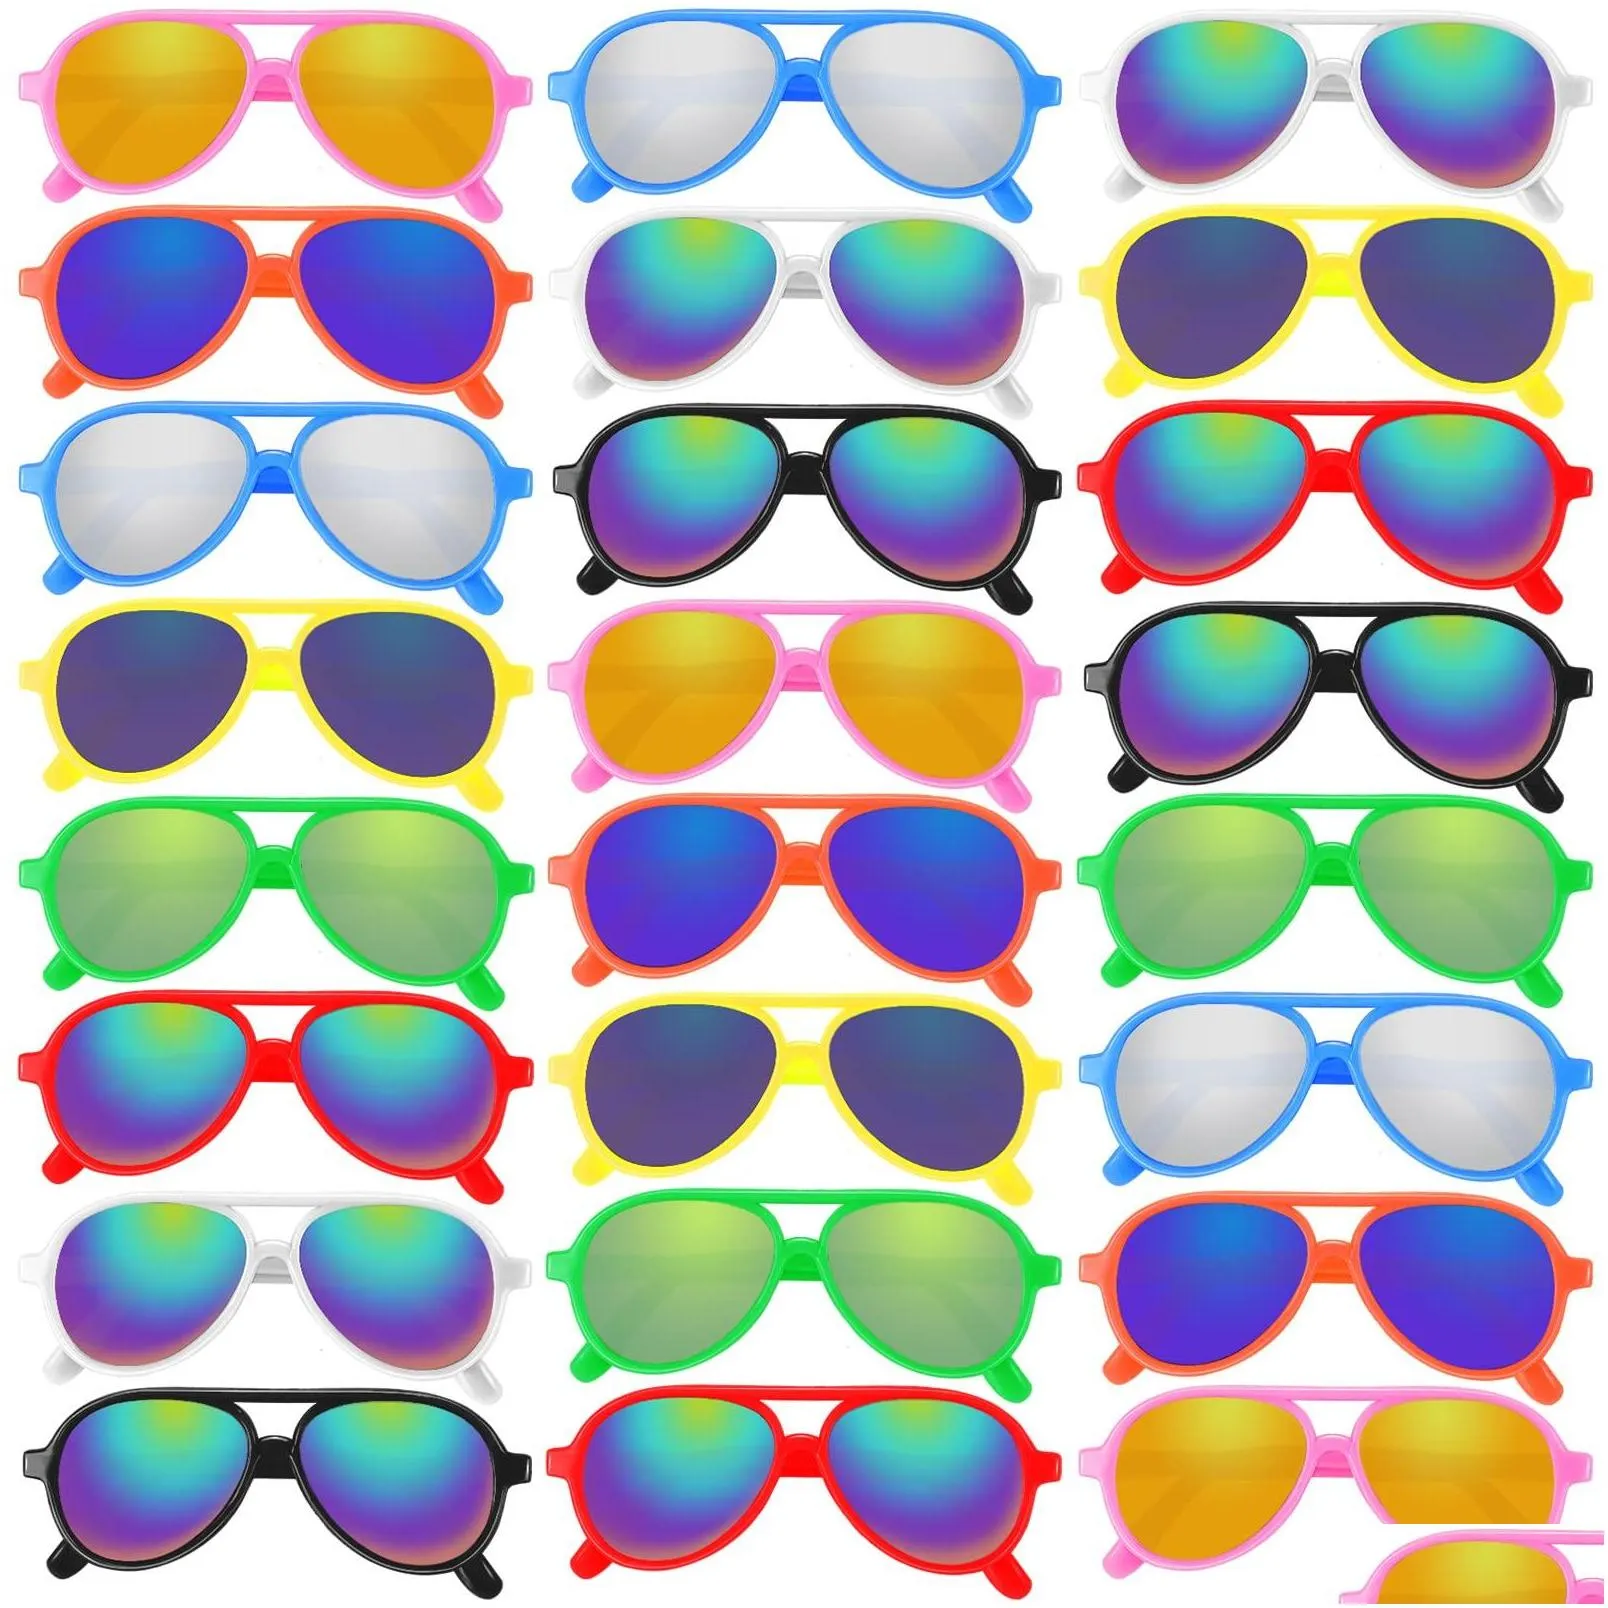 Childrens Sunglasses Frames Kids Bk Party Favors Retro Polka Dot For Boys And Girls Neon With Uv400 Protection Birthday Graduation Po